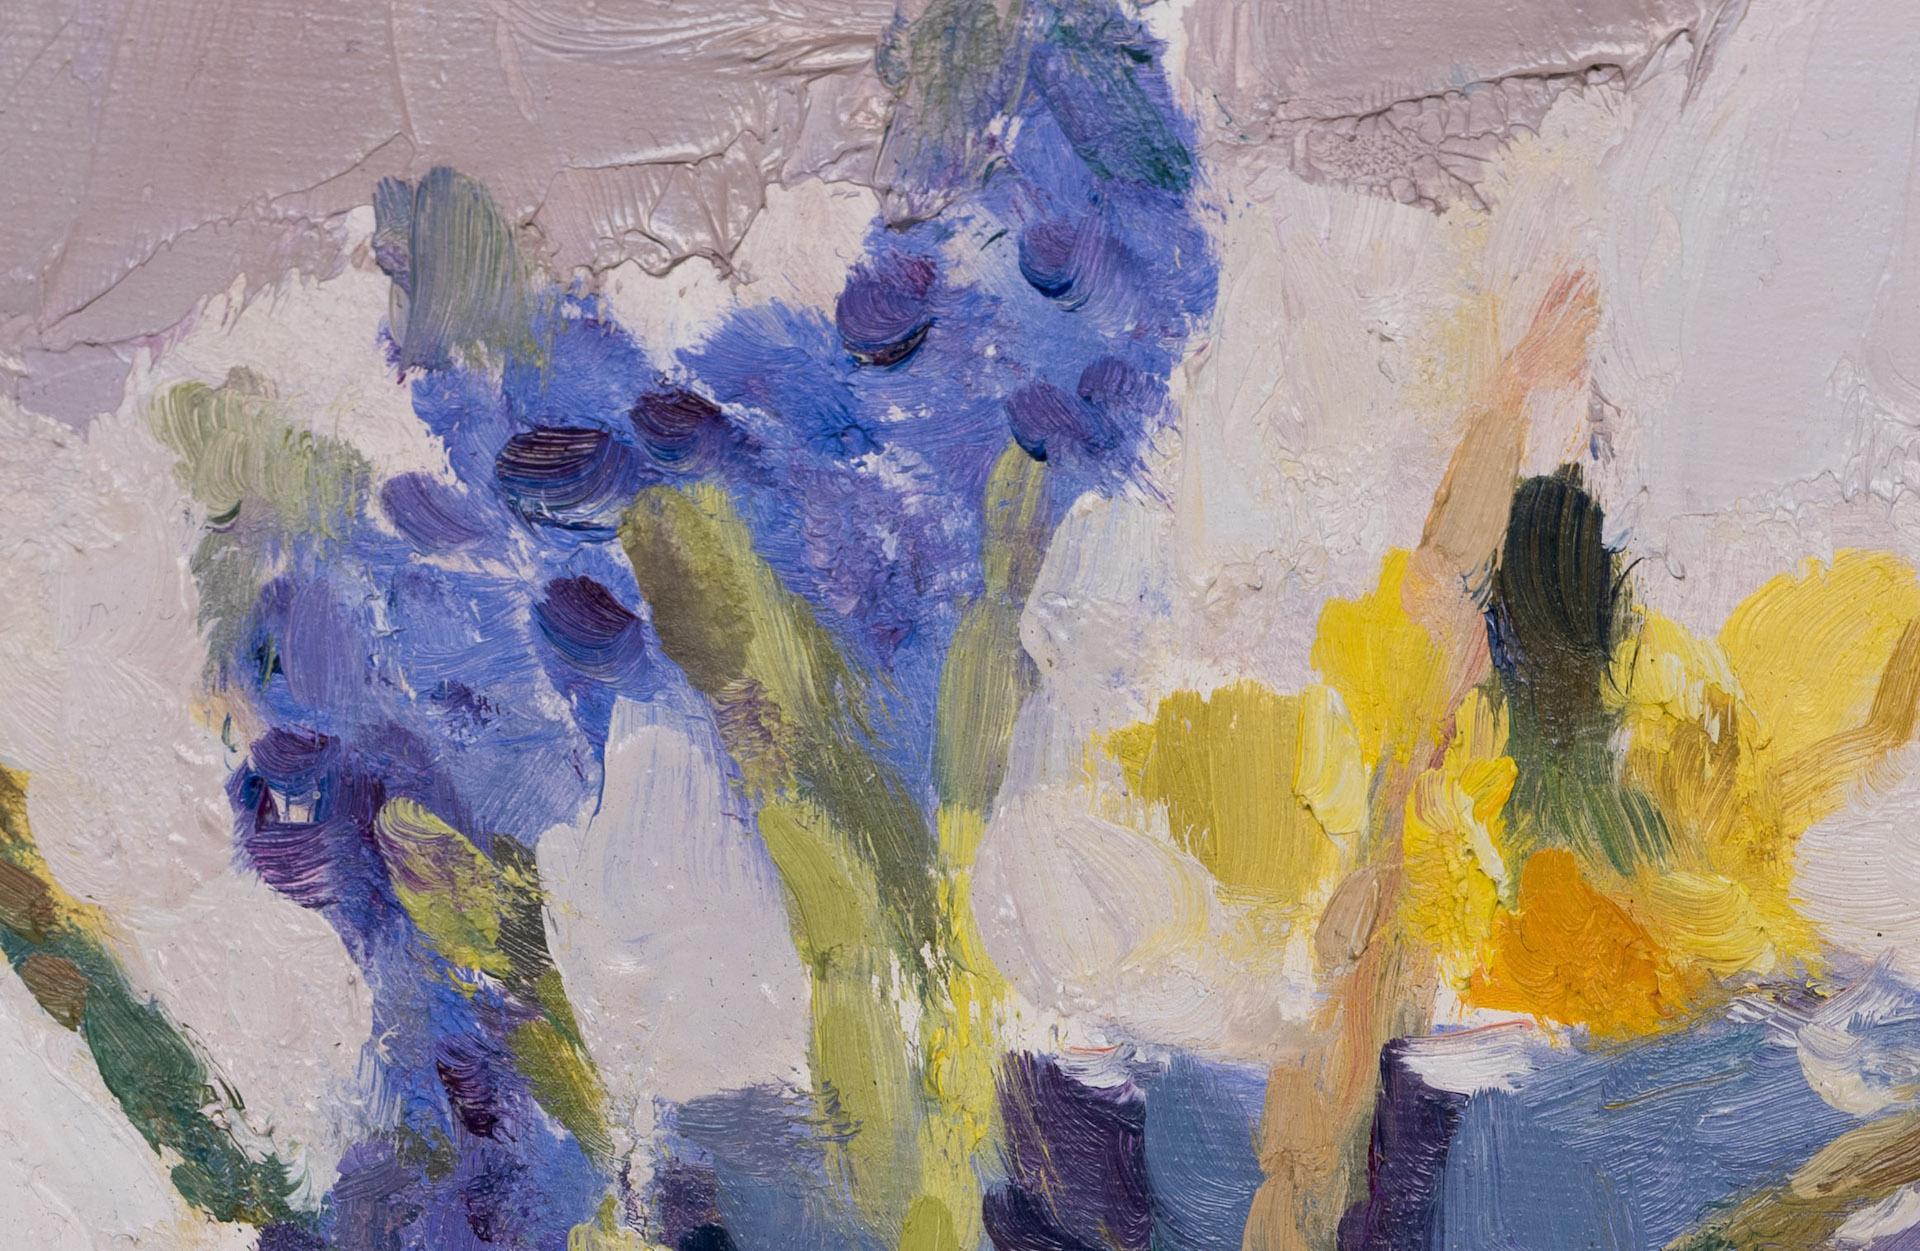 Grape Hyacinths and Daffodils in a Blue Jug BY LYNNE CARTLIDGE, Original Art - Gray Abstract Painting by Lynne Cartlidge